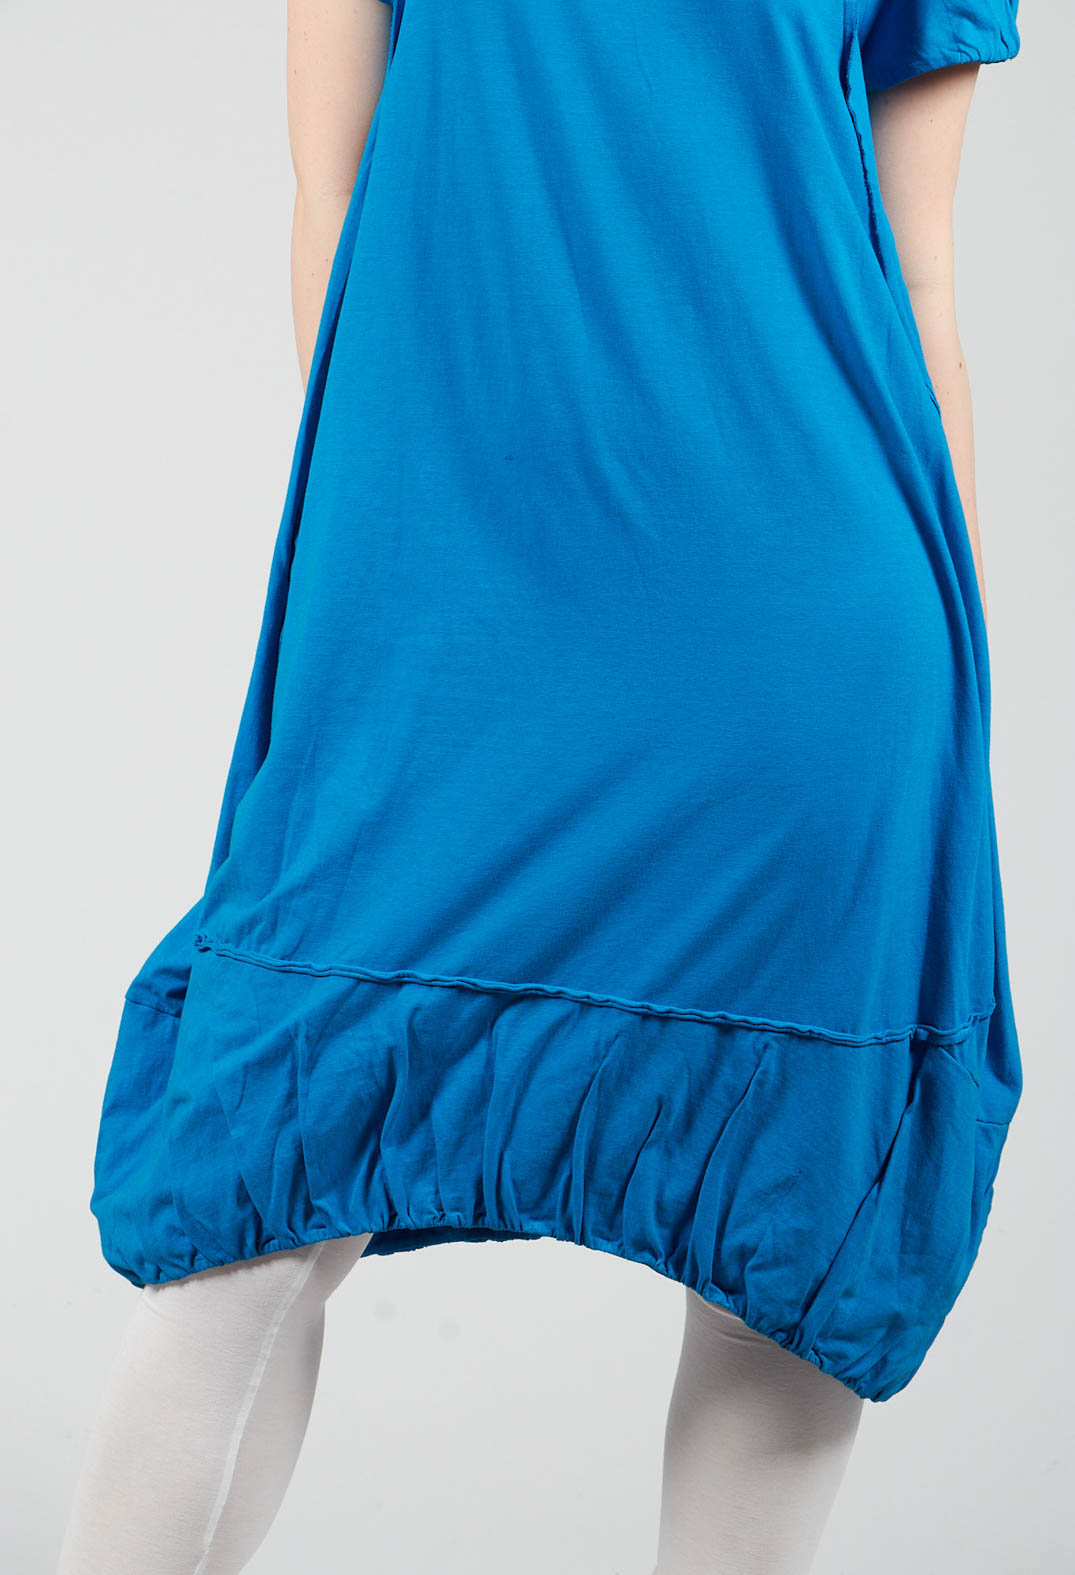 Short Sleeved Jersey Dress with Gathered Hem in Blue